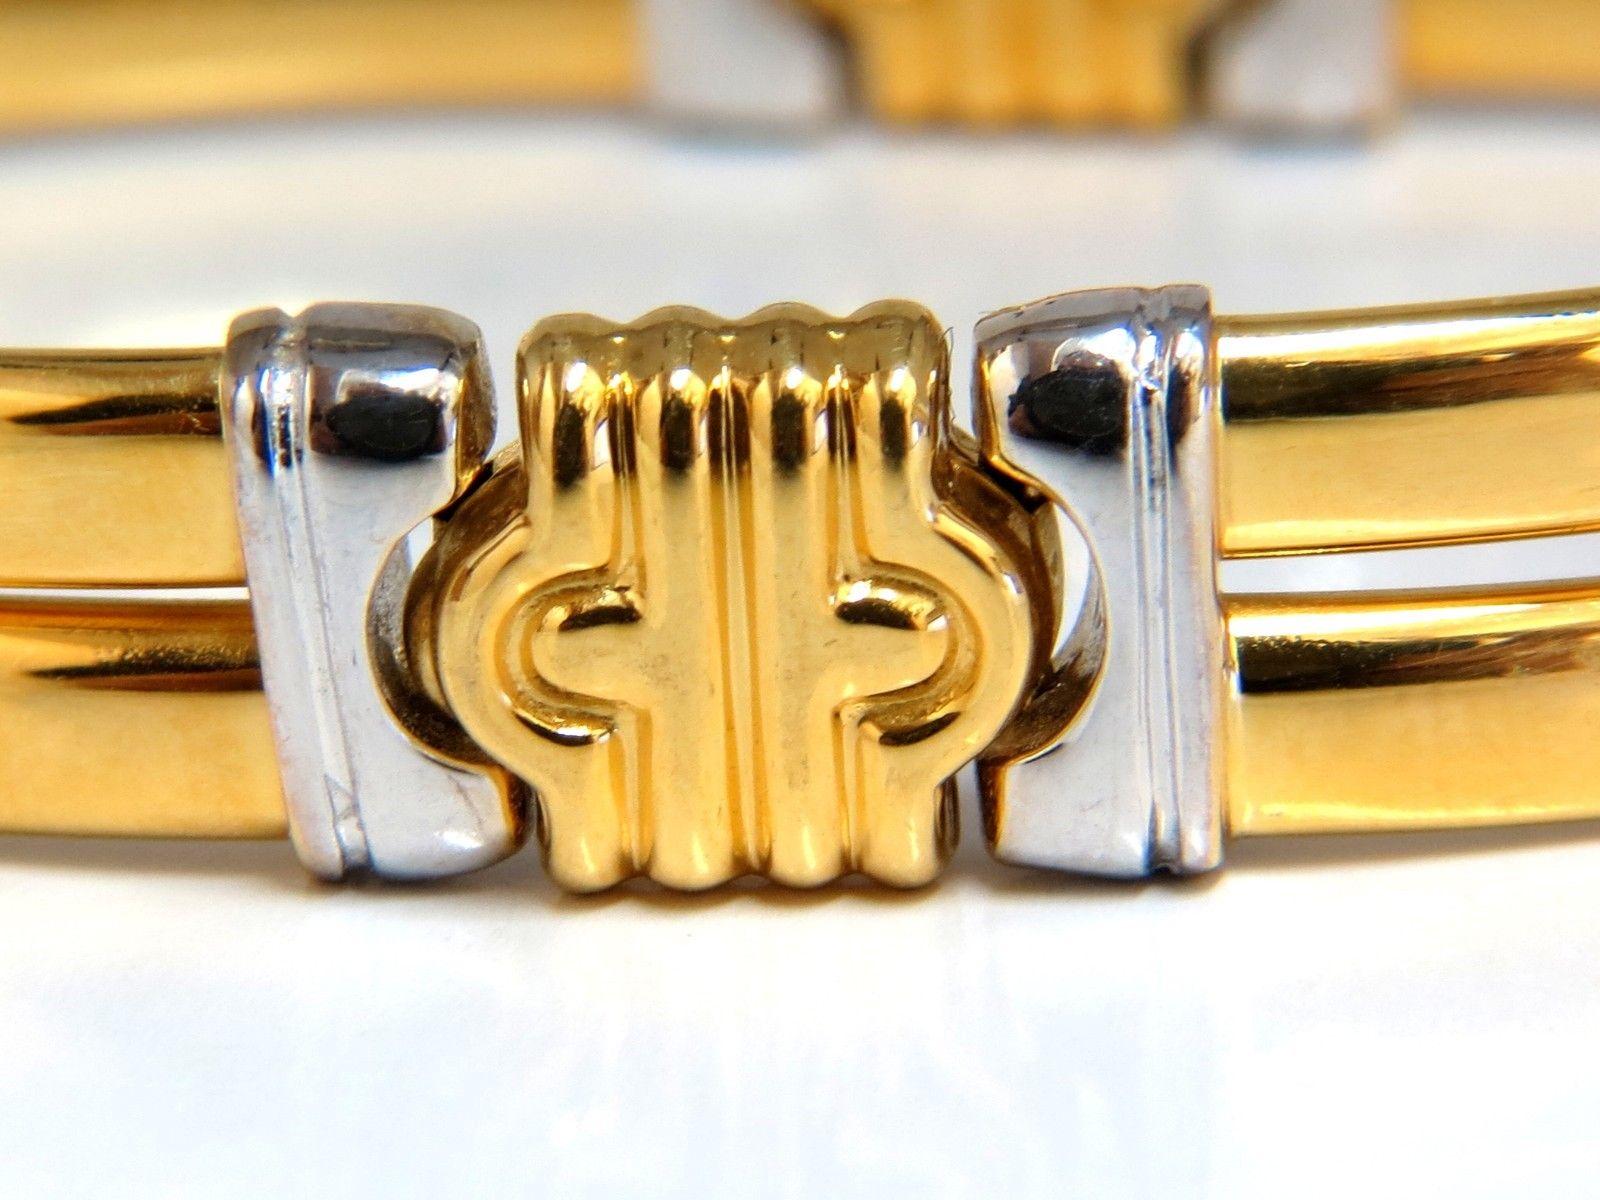 Mod, Two Toned Double Slim Cuff Bracelet

Byzantine Deco

Smooth & High Shine

7 inch / wearable length

26 Grams.

10.6mm wide

18kt yellow / white Gold.

Secure & Comfortable clasp

*Matching Necklace is Available, please inquire.